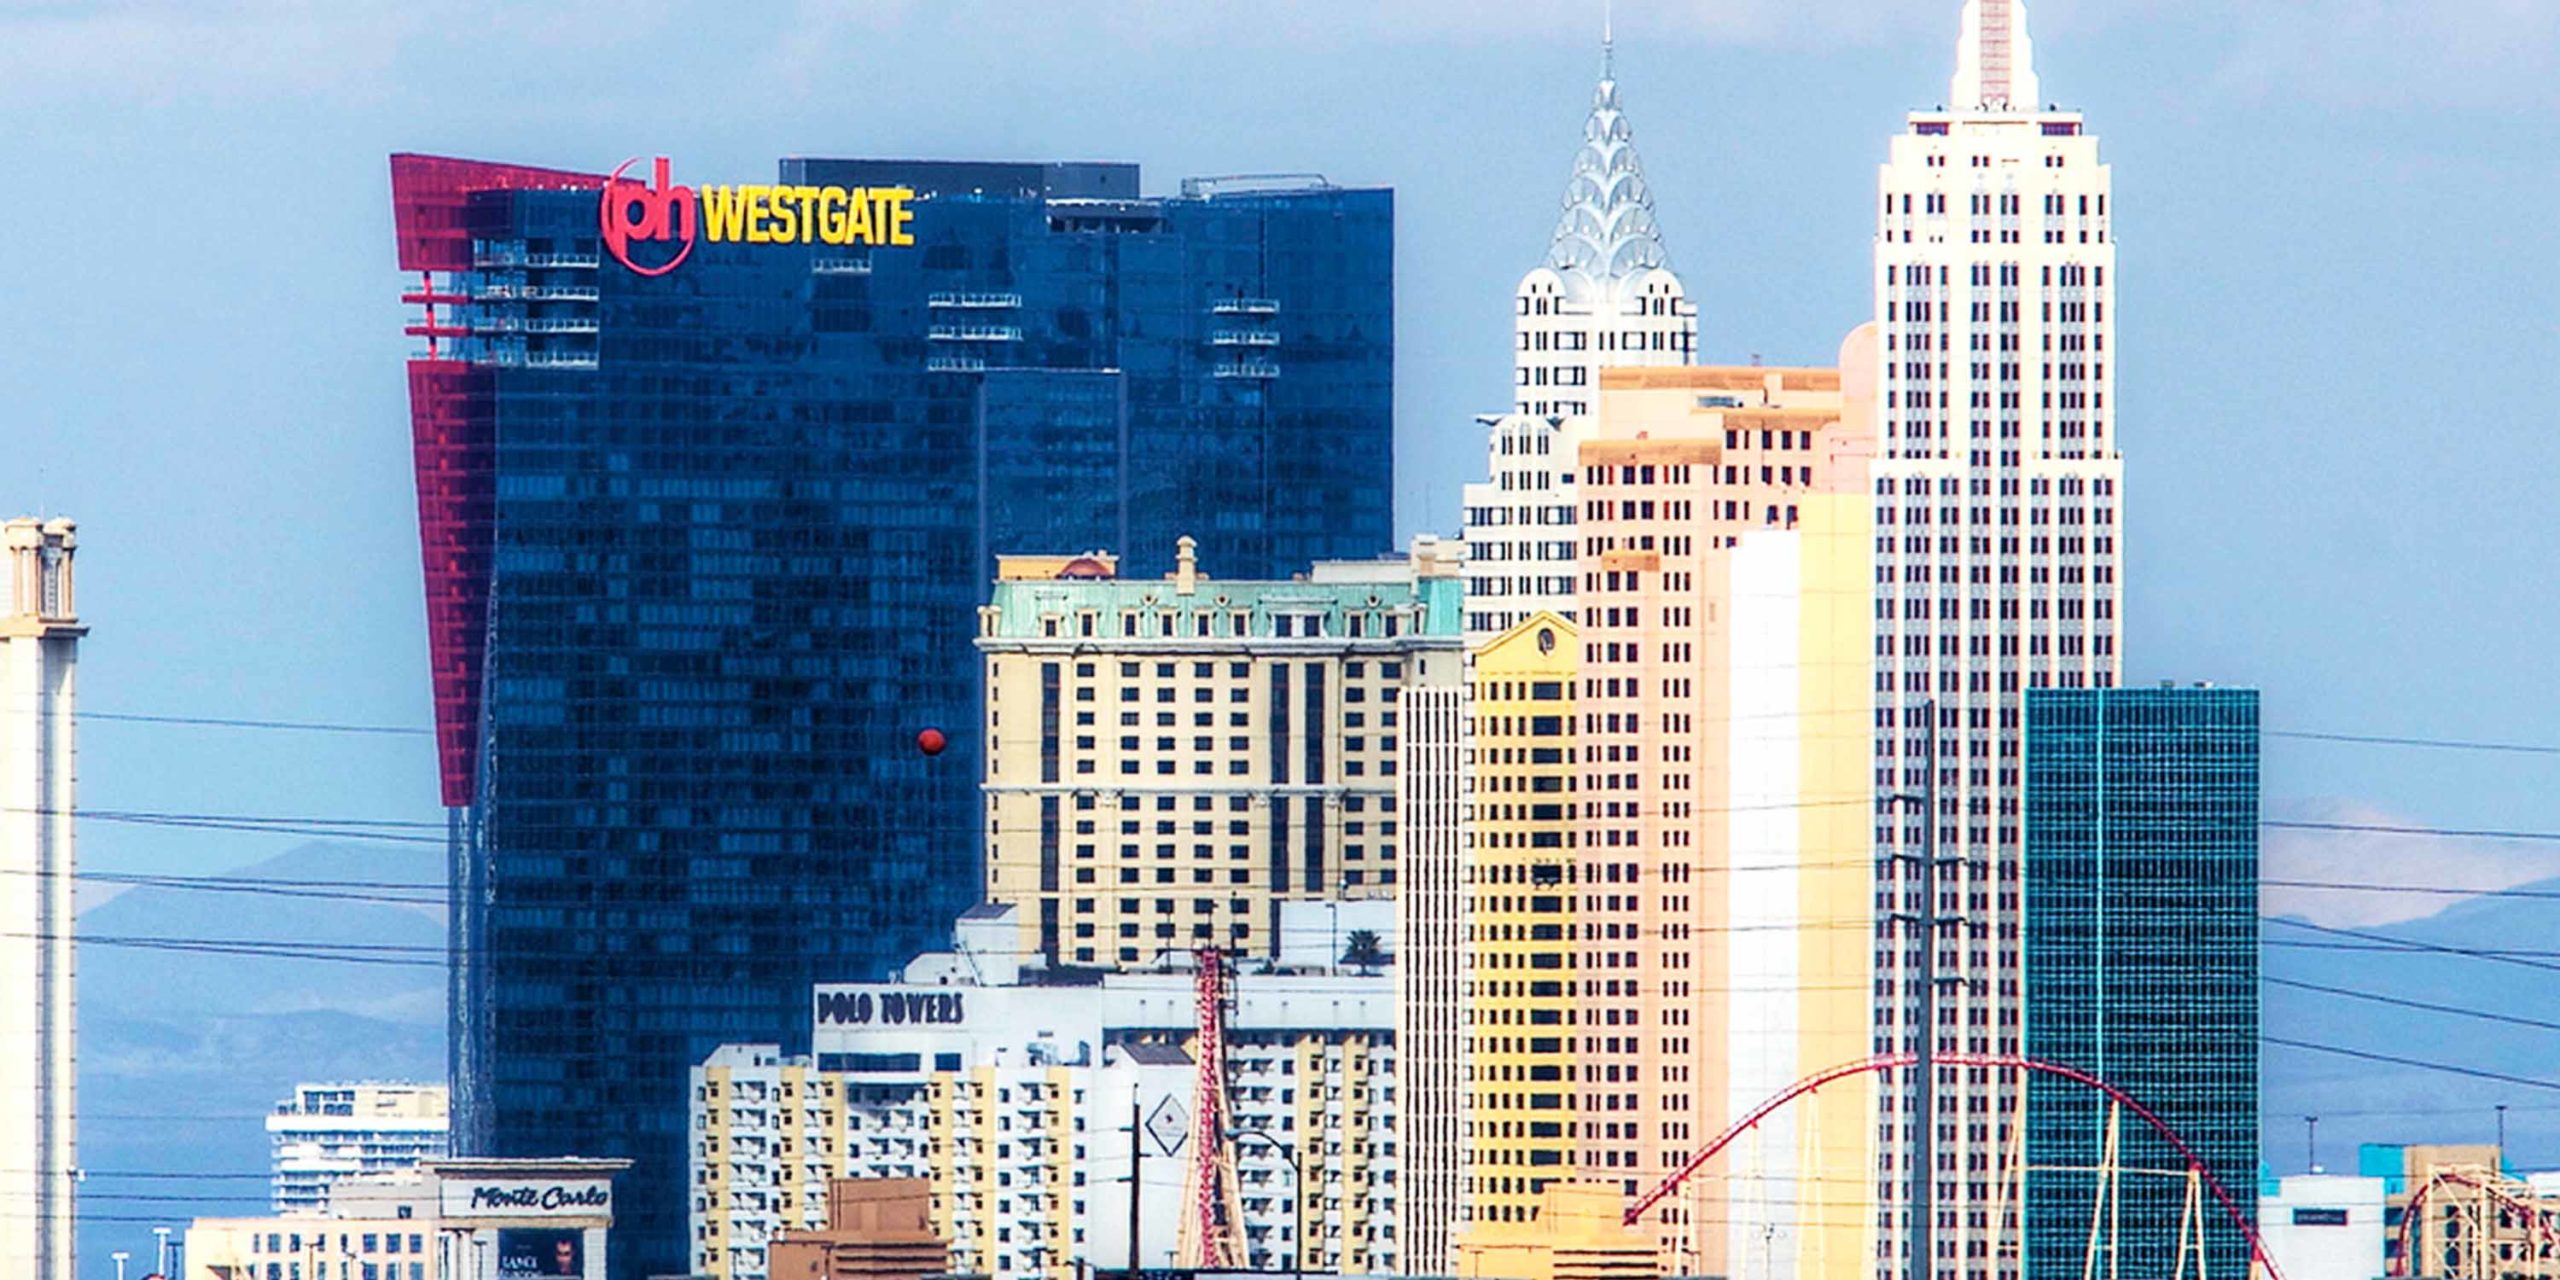 Planet Hollywood Towers by Westgate header image #2